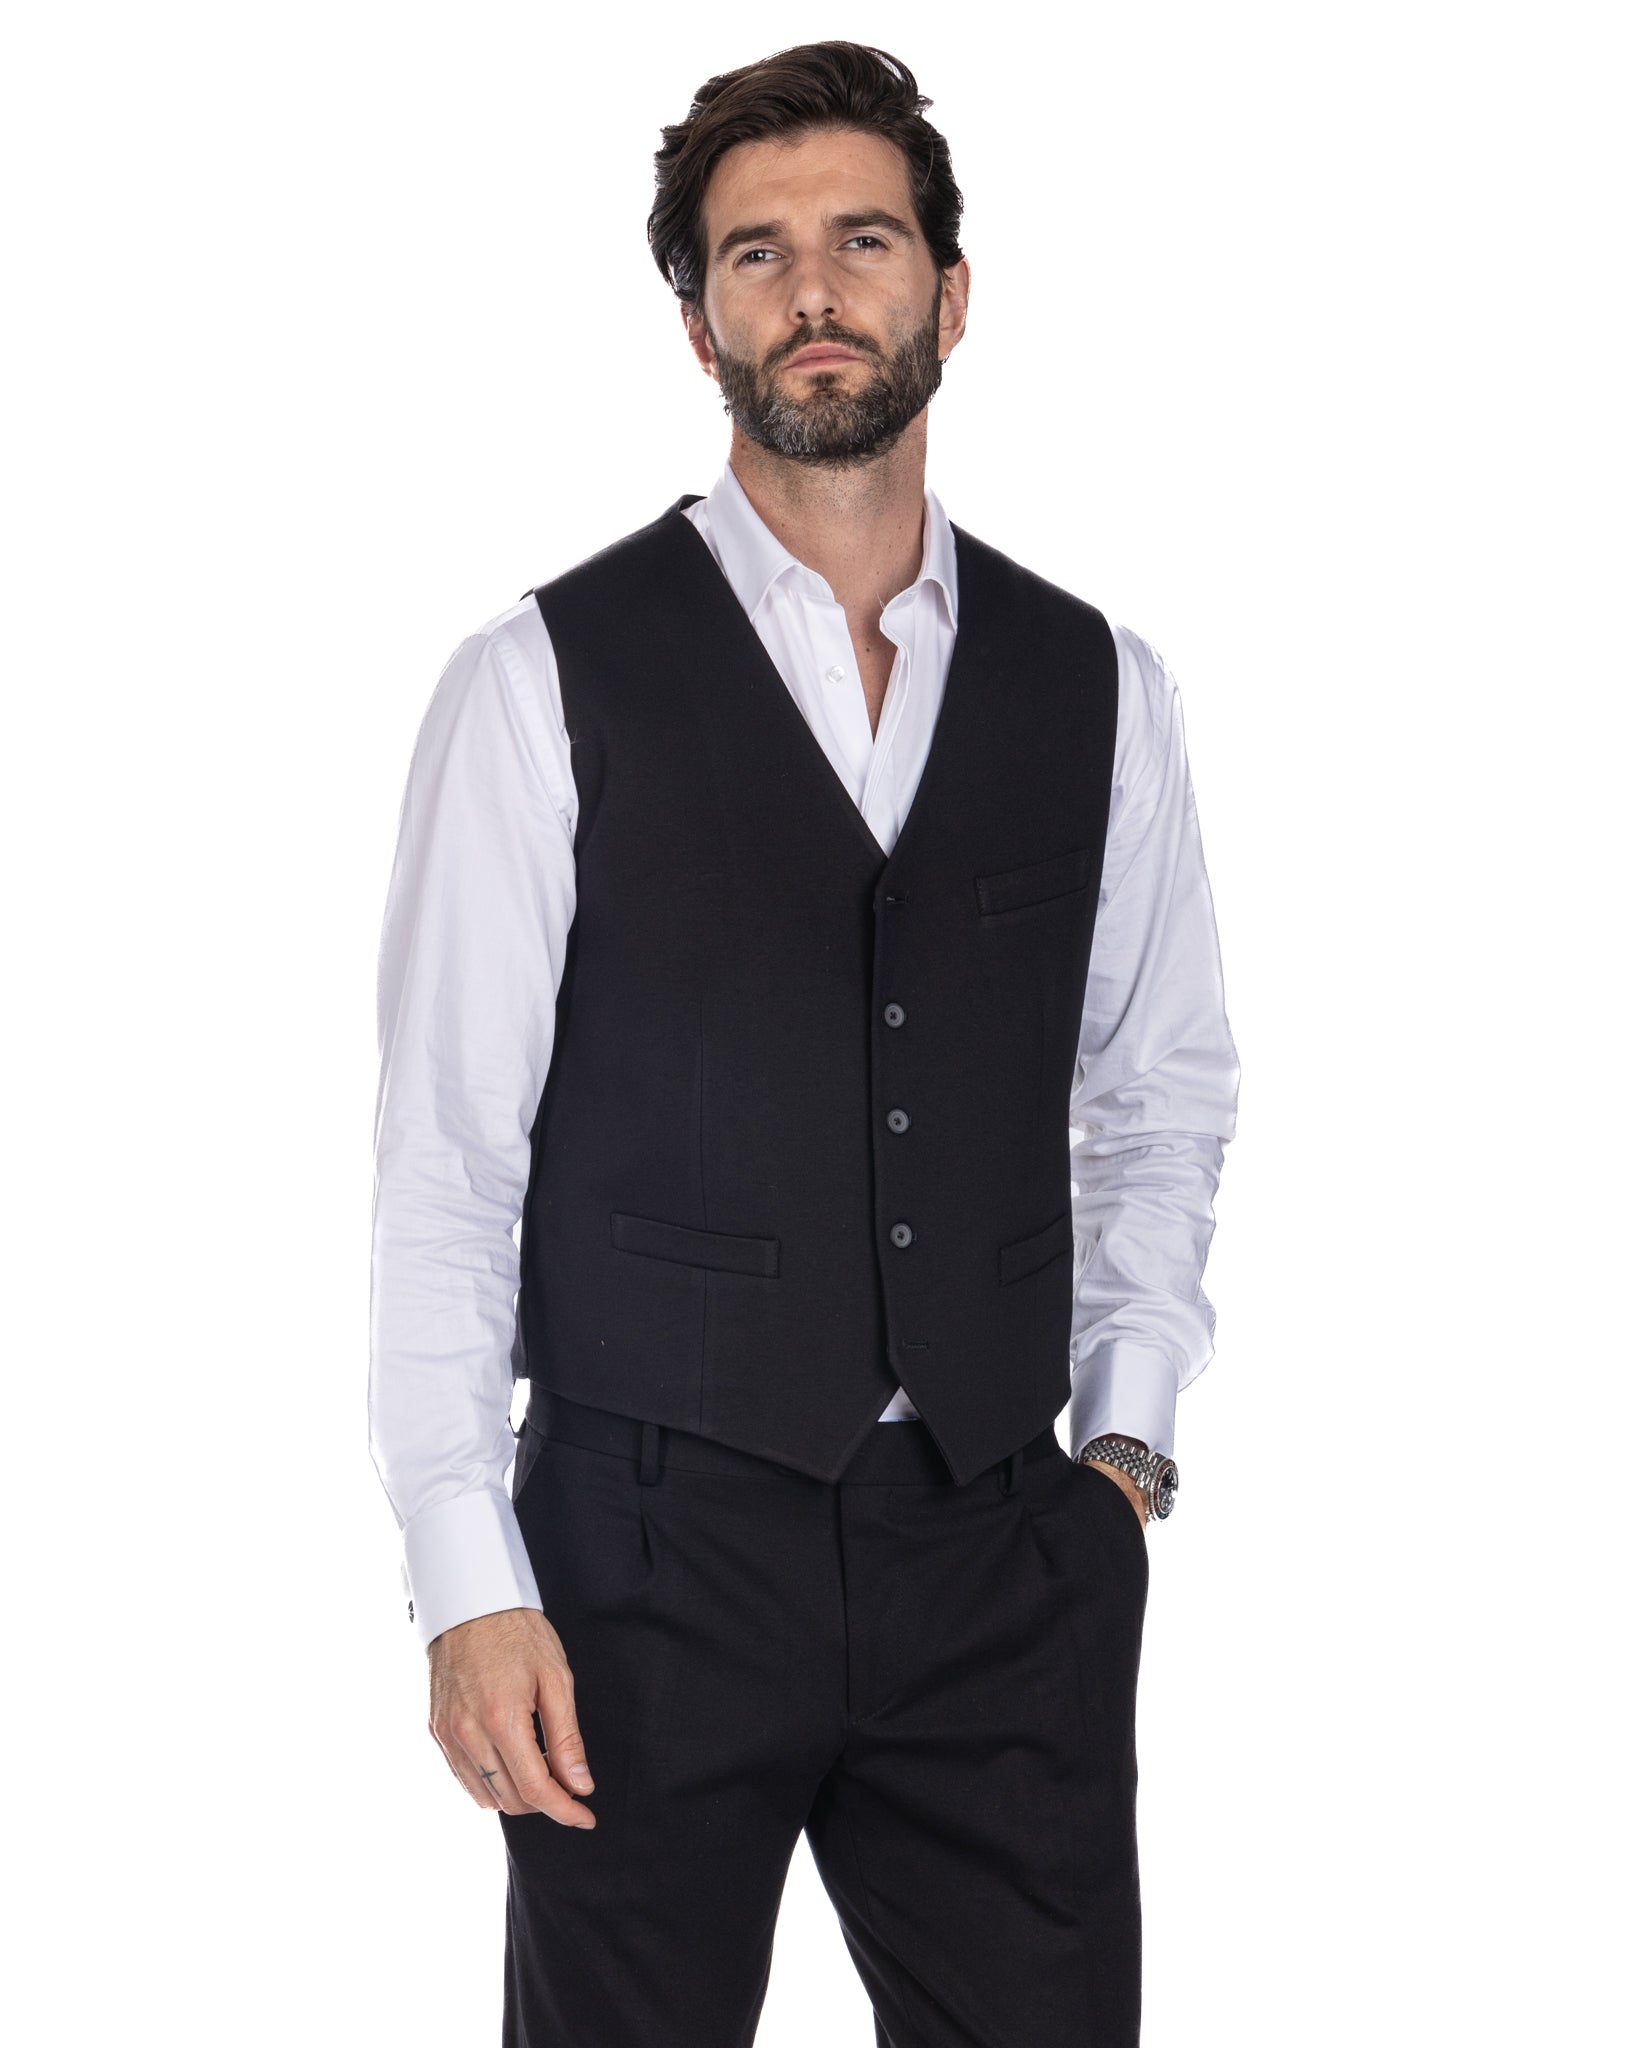 Mustang - single-breasted waistcoat in black milano stitch